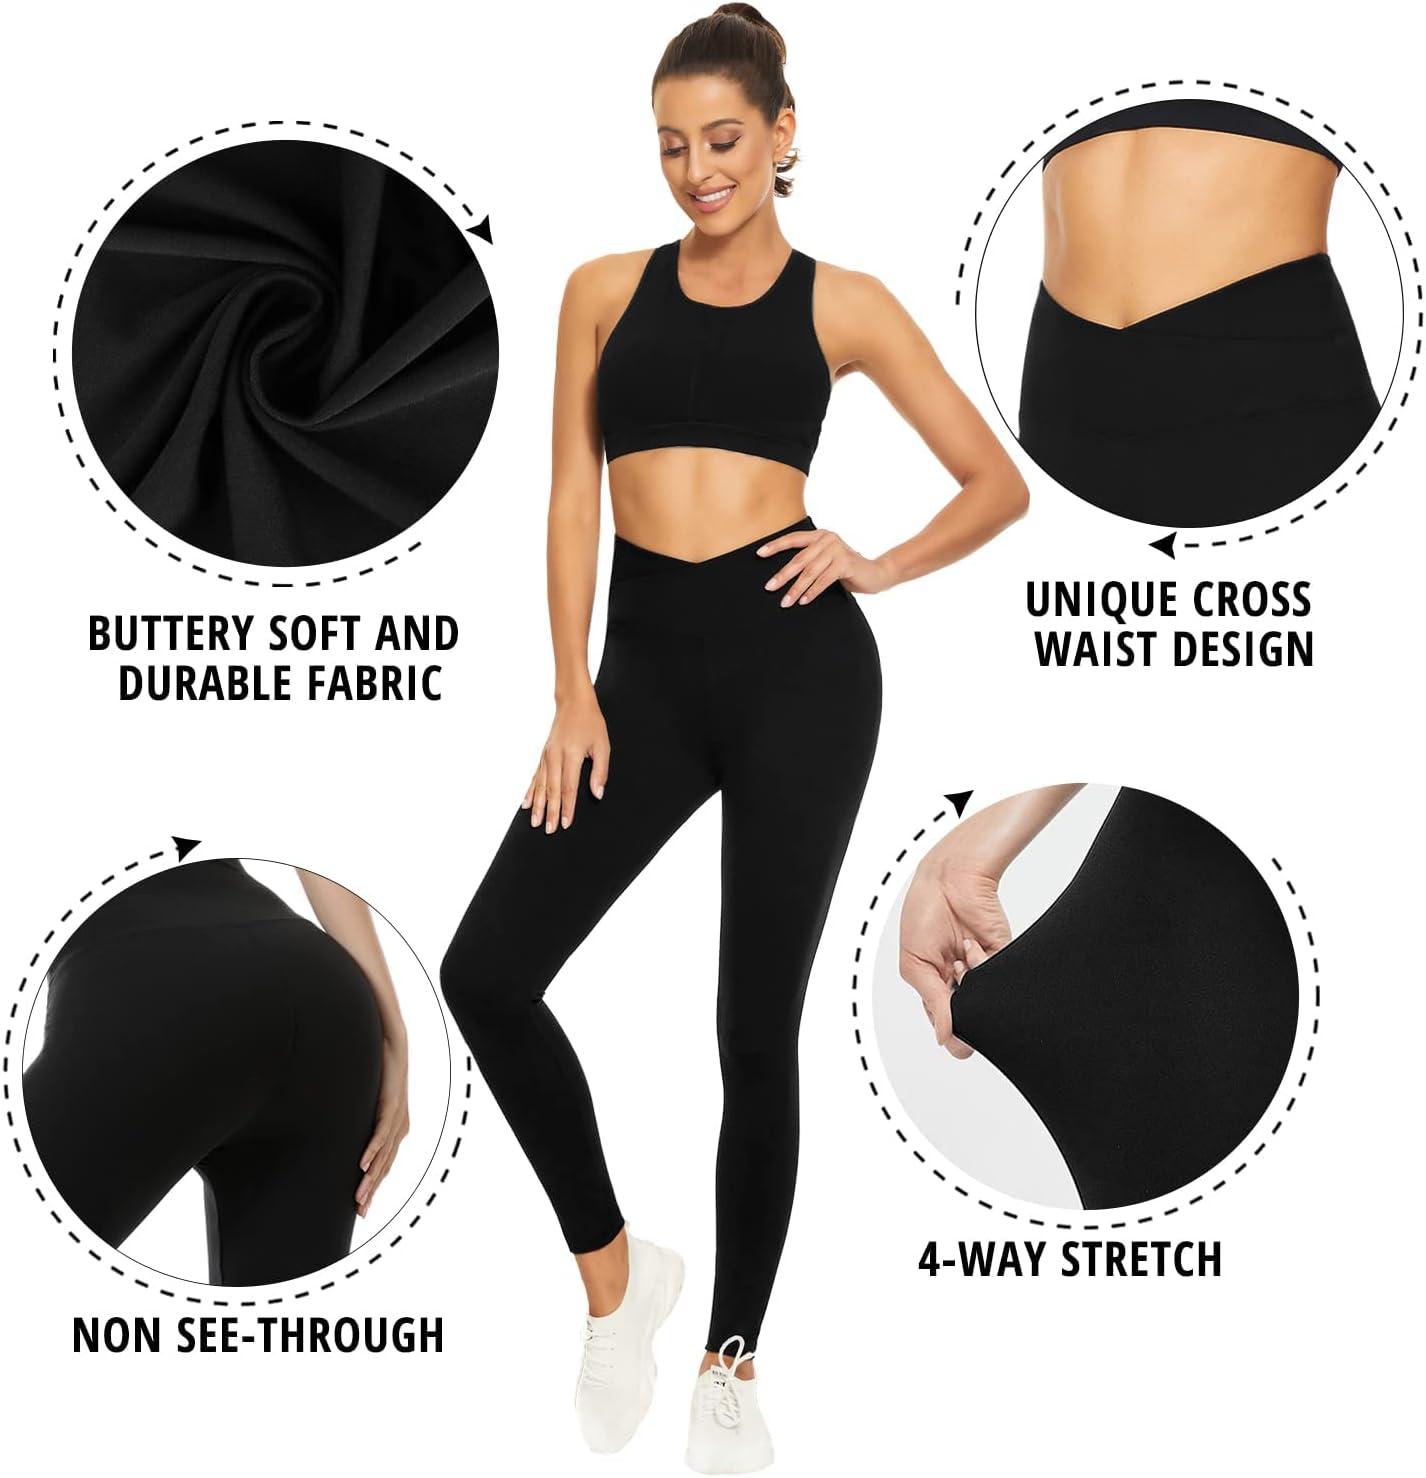  we fleece Women's V Crossover Flare Leggings-High Waisted Tummy  Control Casual Workout Flare Yoga Pants Black Wide Leg Pants (Small, Black)  : Clothing, Shoes & Jewelry